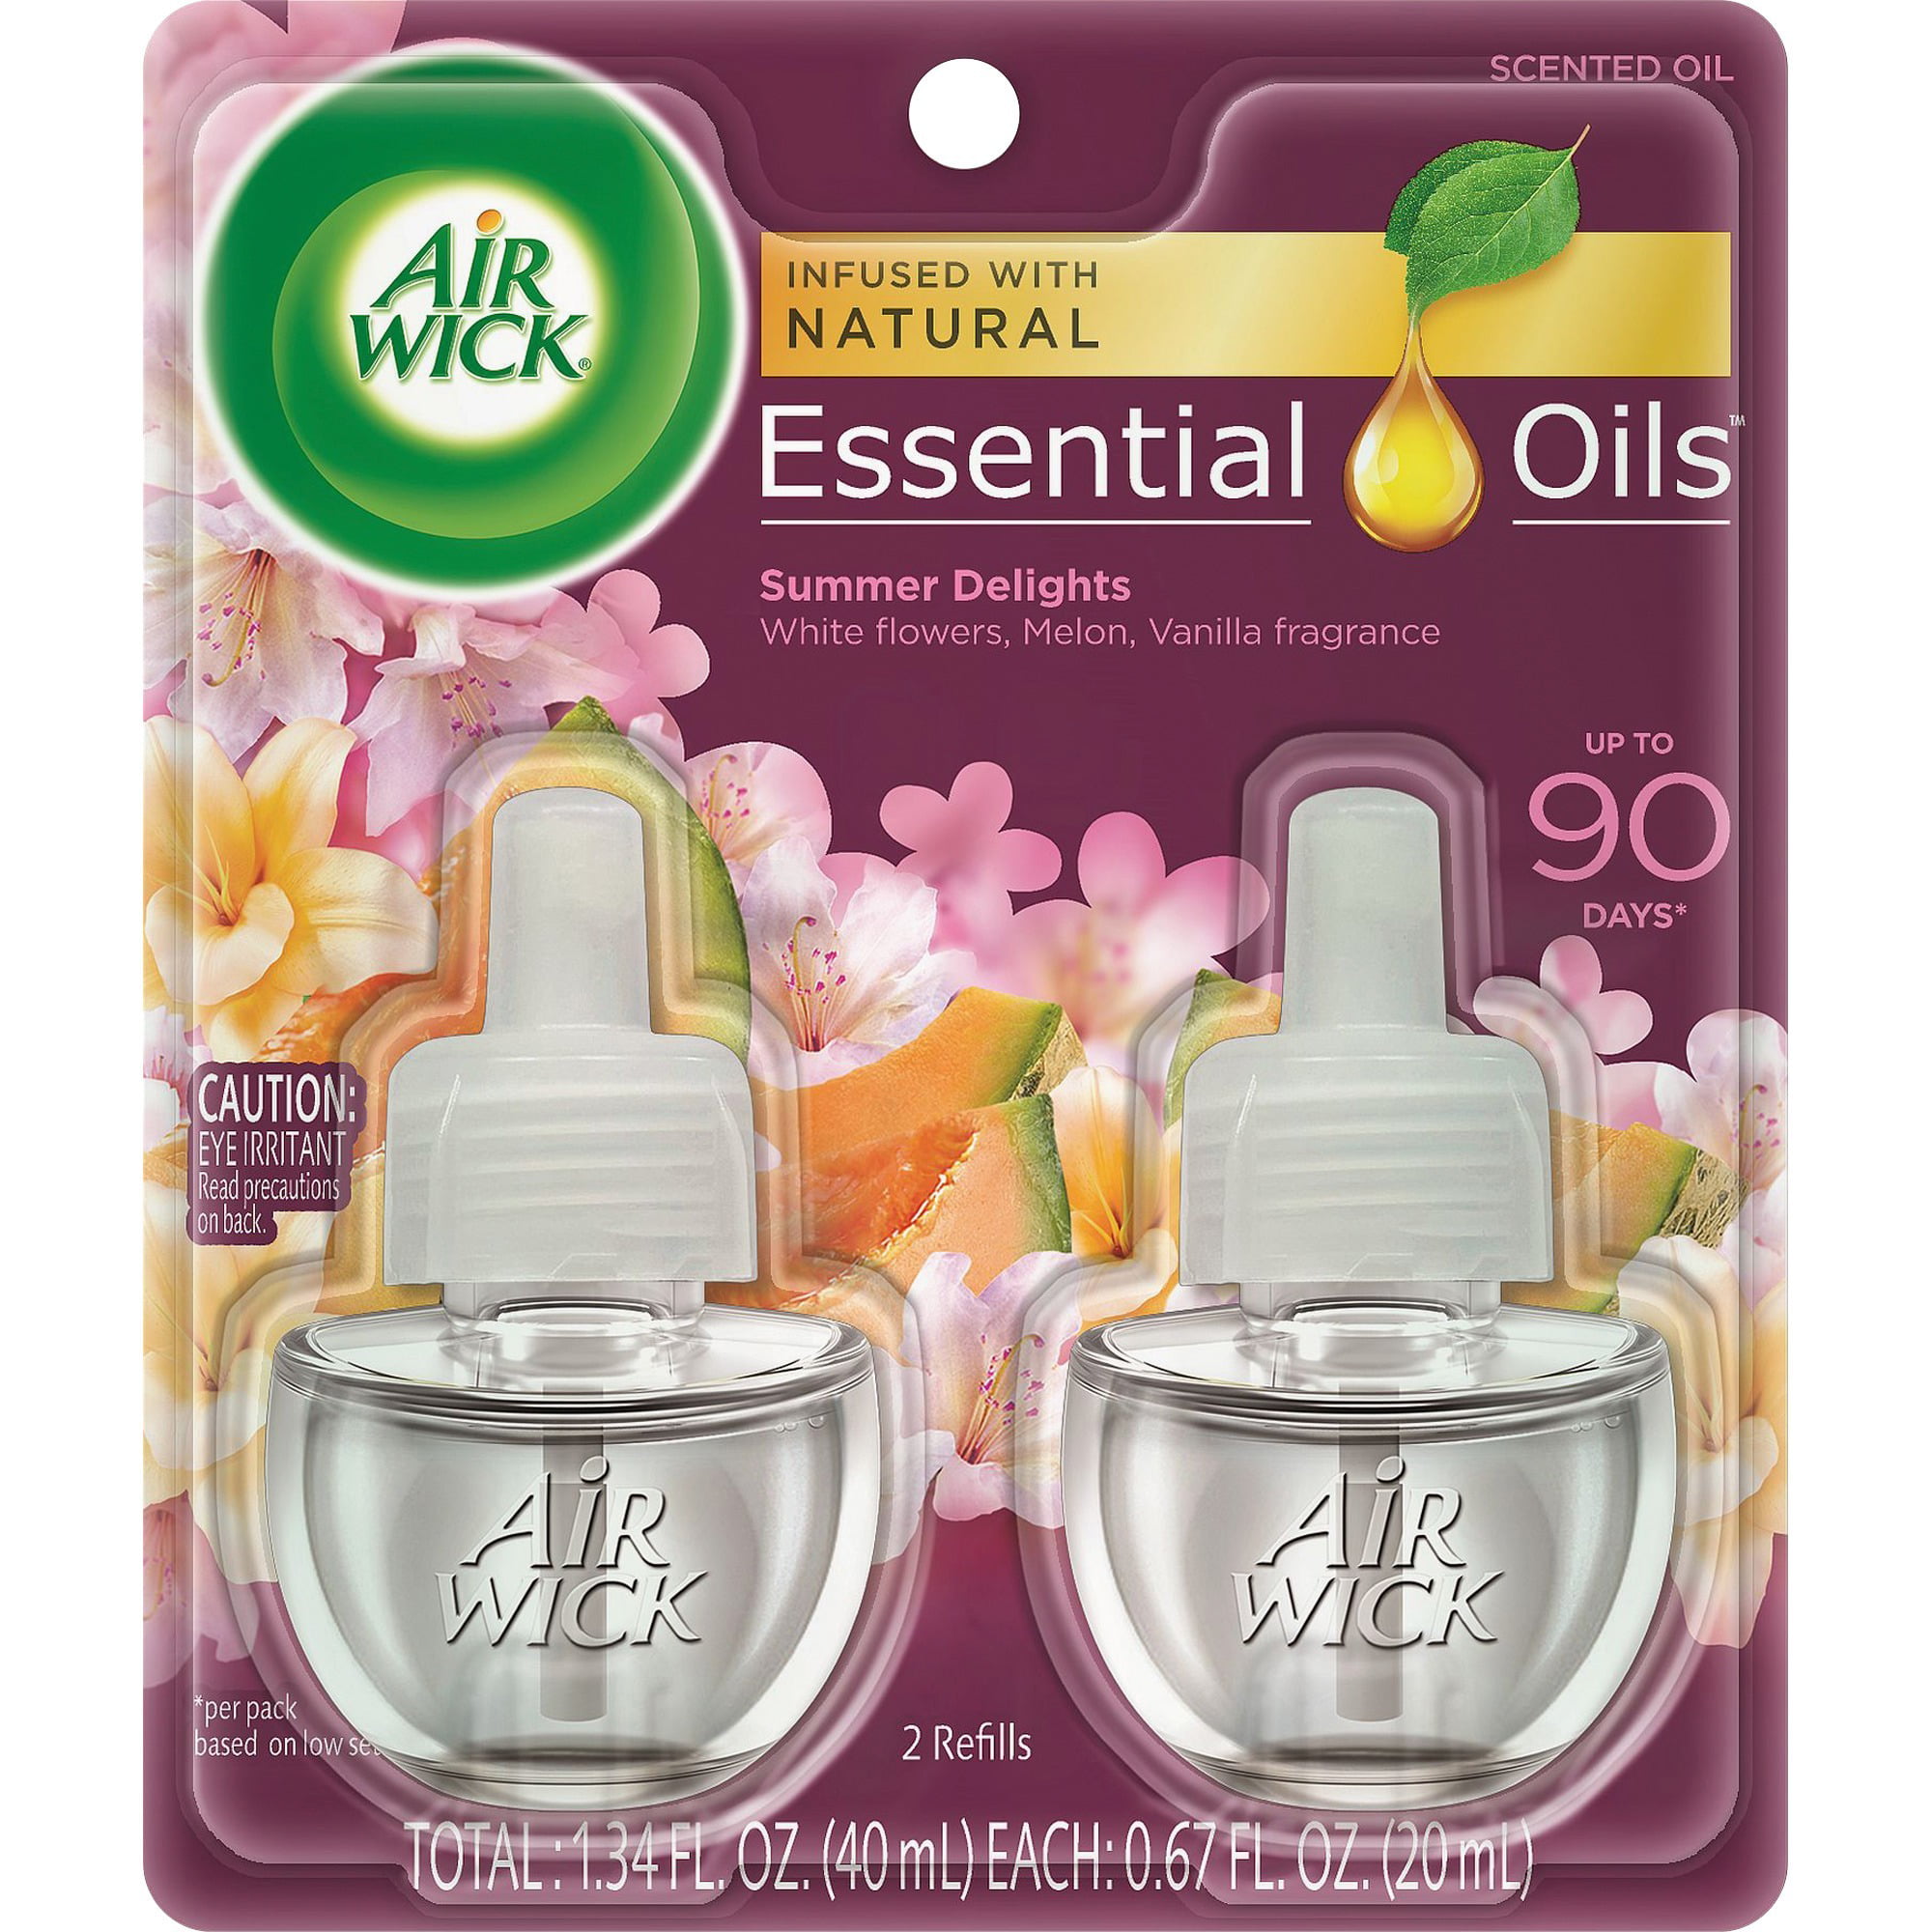 Air wick scented oil warmer reviews